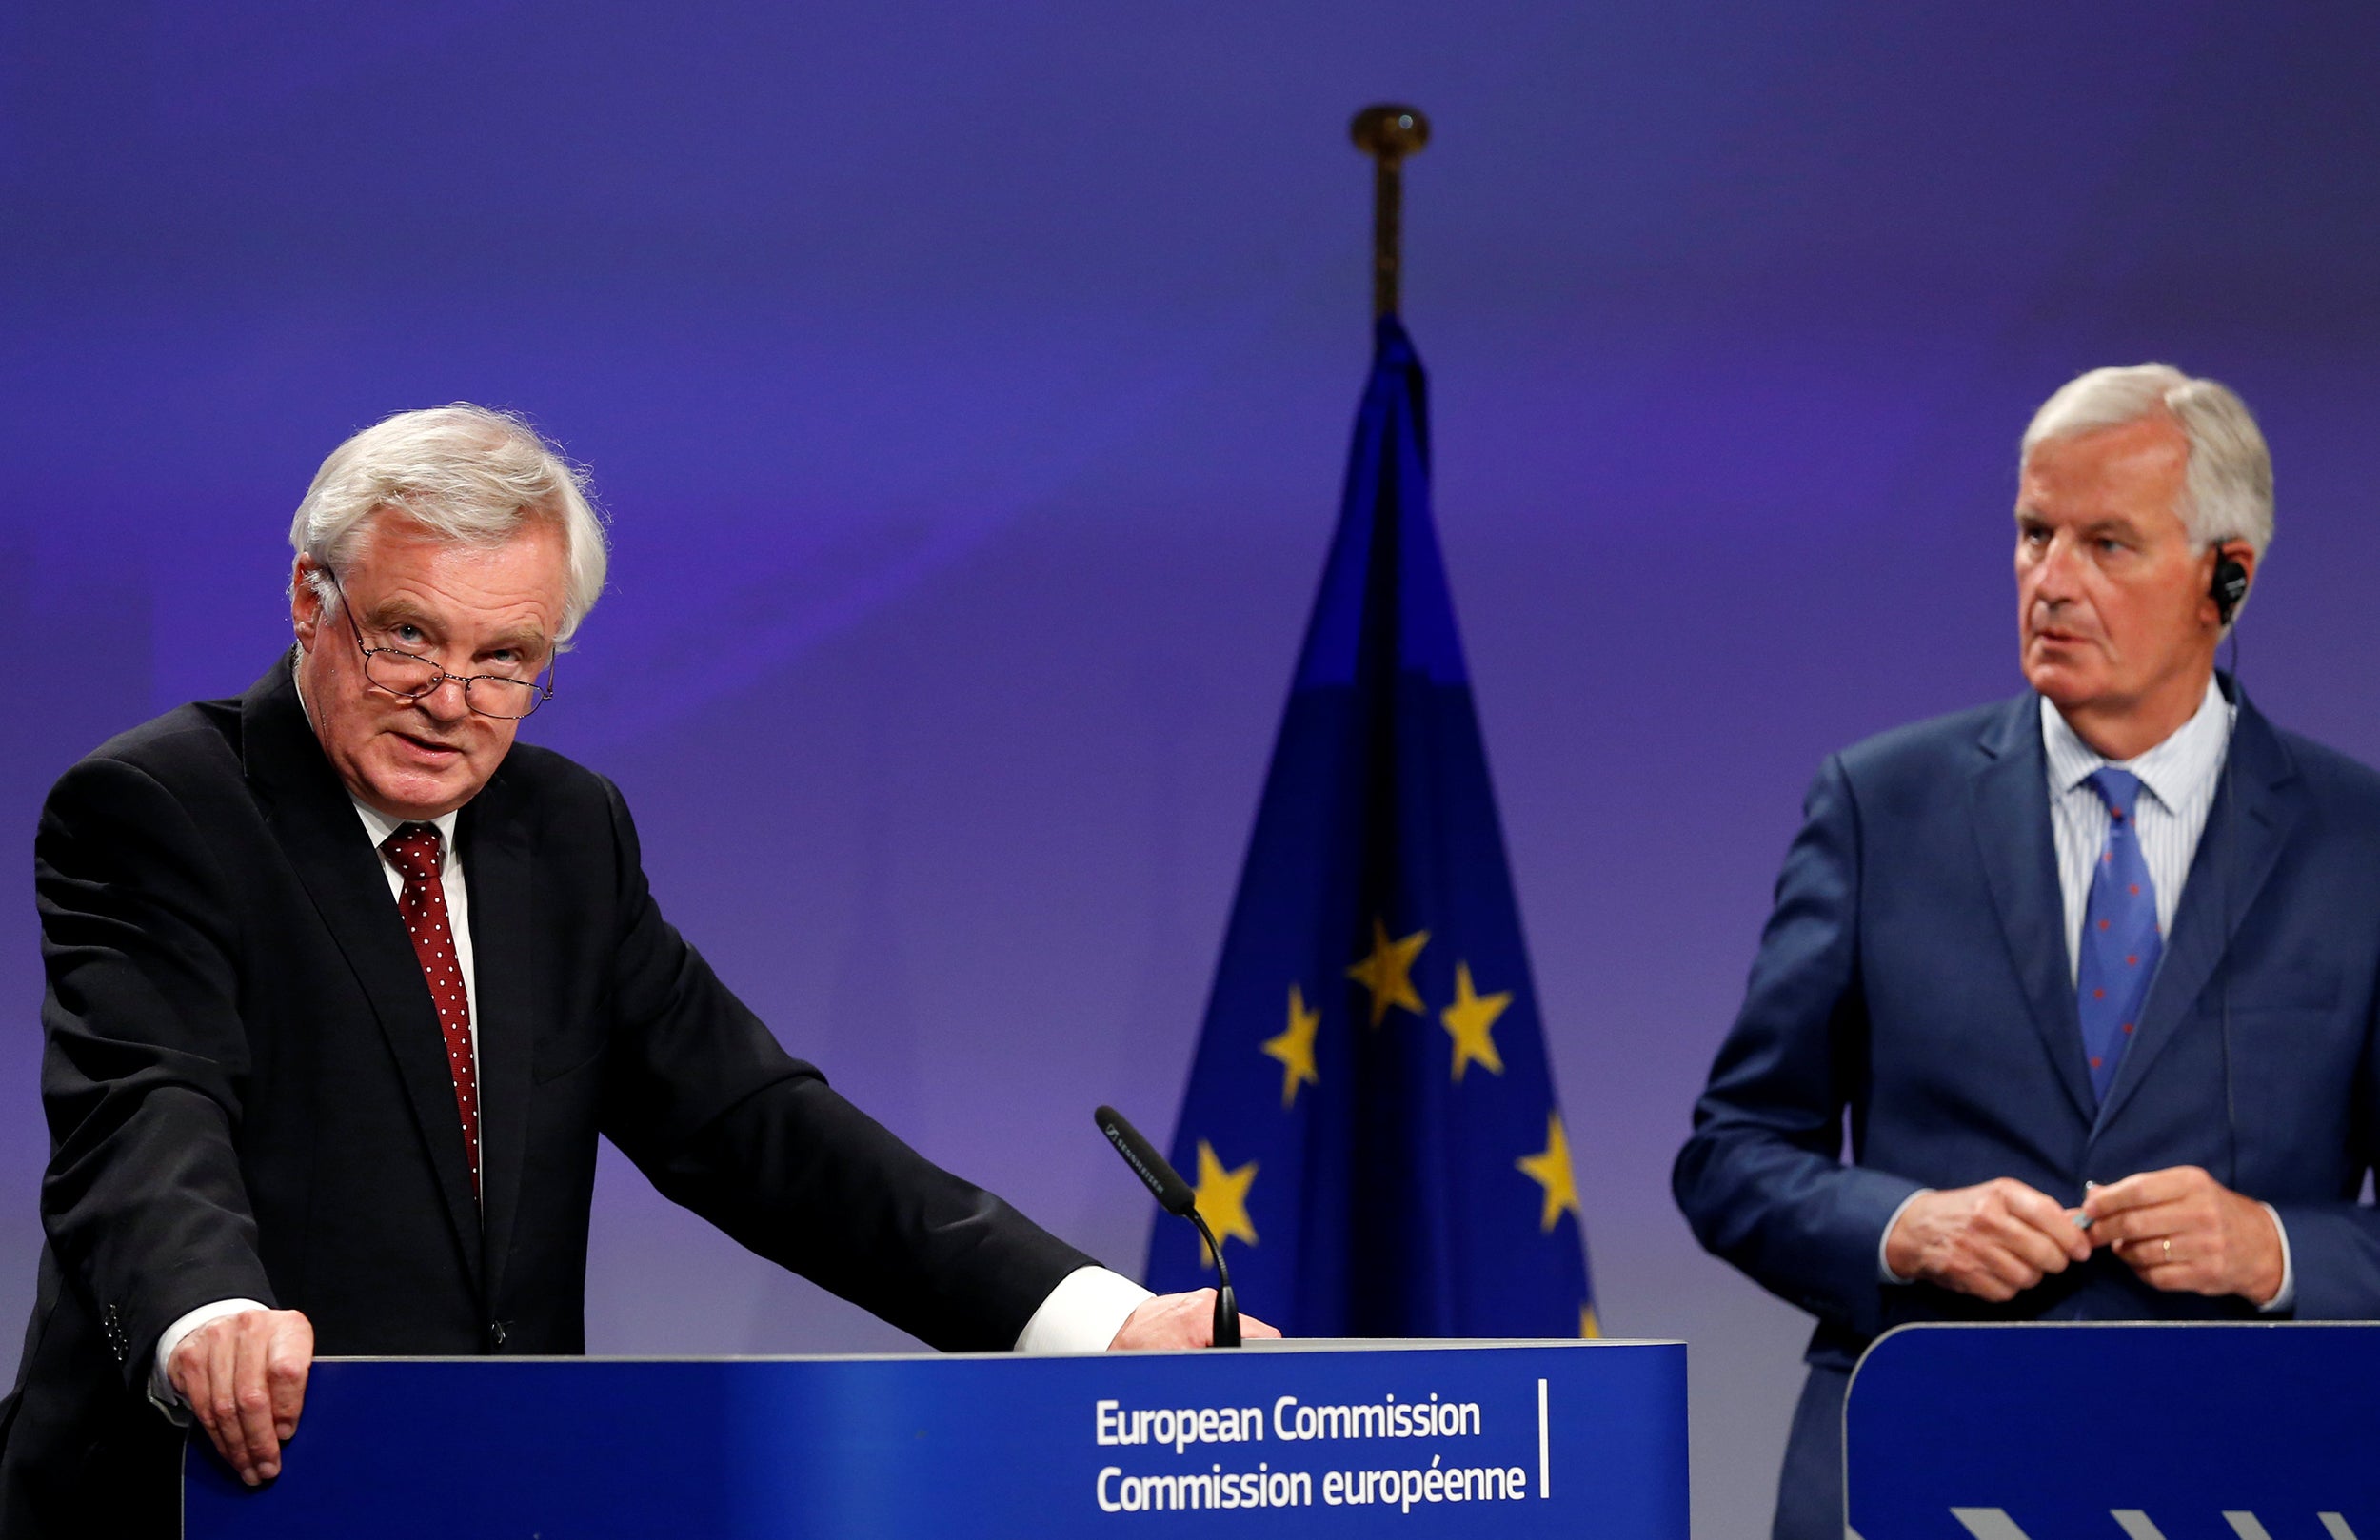 Michel Barnier is right to want to educate the UK, but his statements may reinforce pro-Brexit arguments